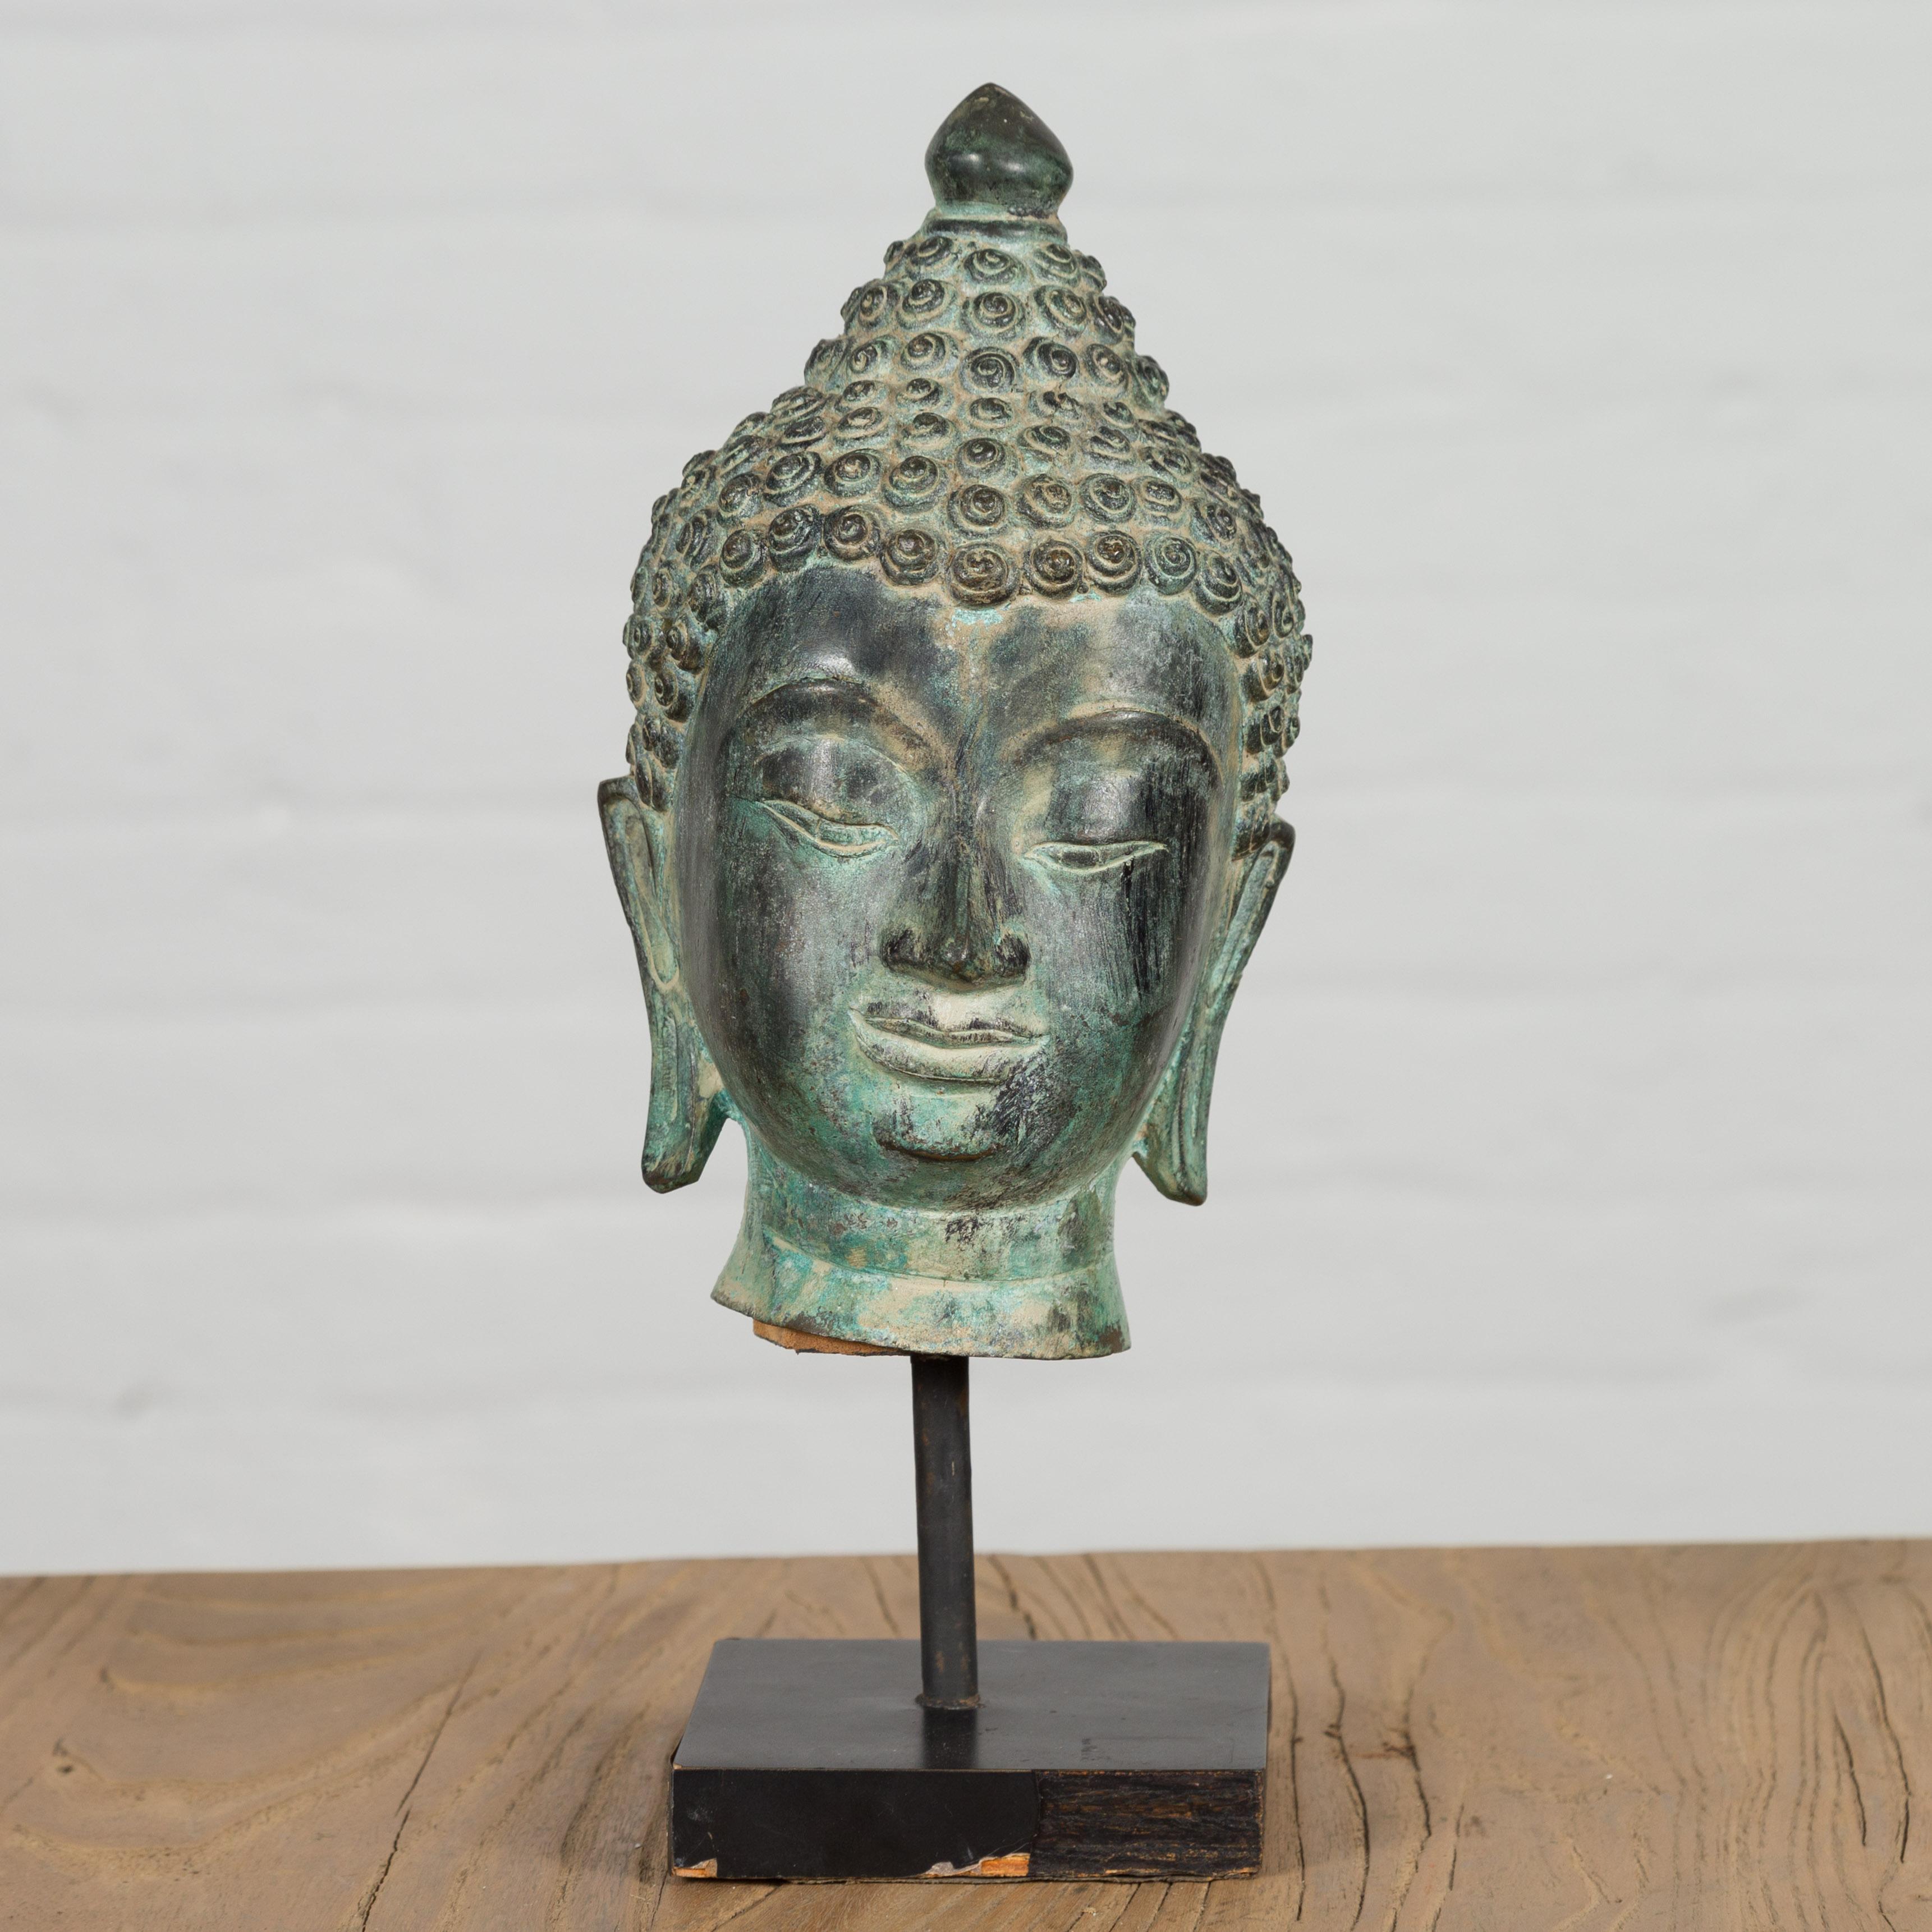 A vintage bronze Buddha head sculpture on custom base, with verdigris patina, made with the lost wax casting process. Experience serenity and grace with this vintage bronze Buddha head sculpture that exudes an aura of spiritual transcendence. The